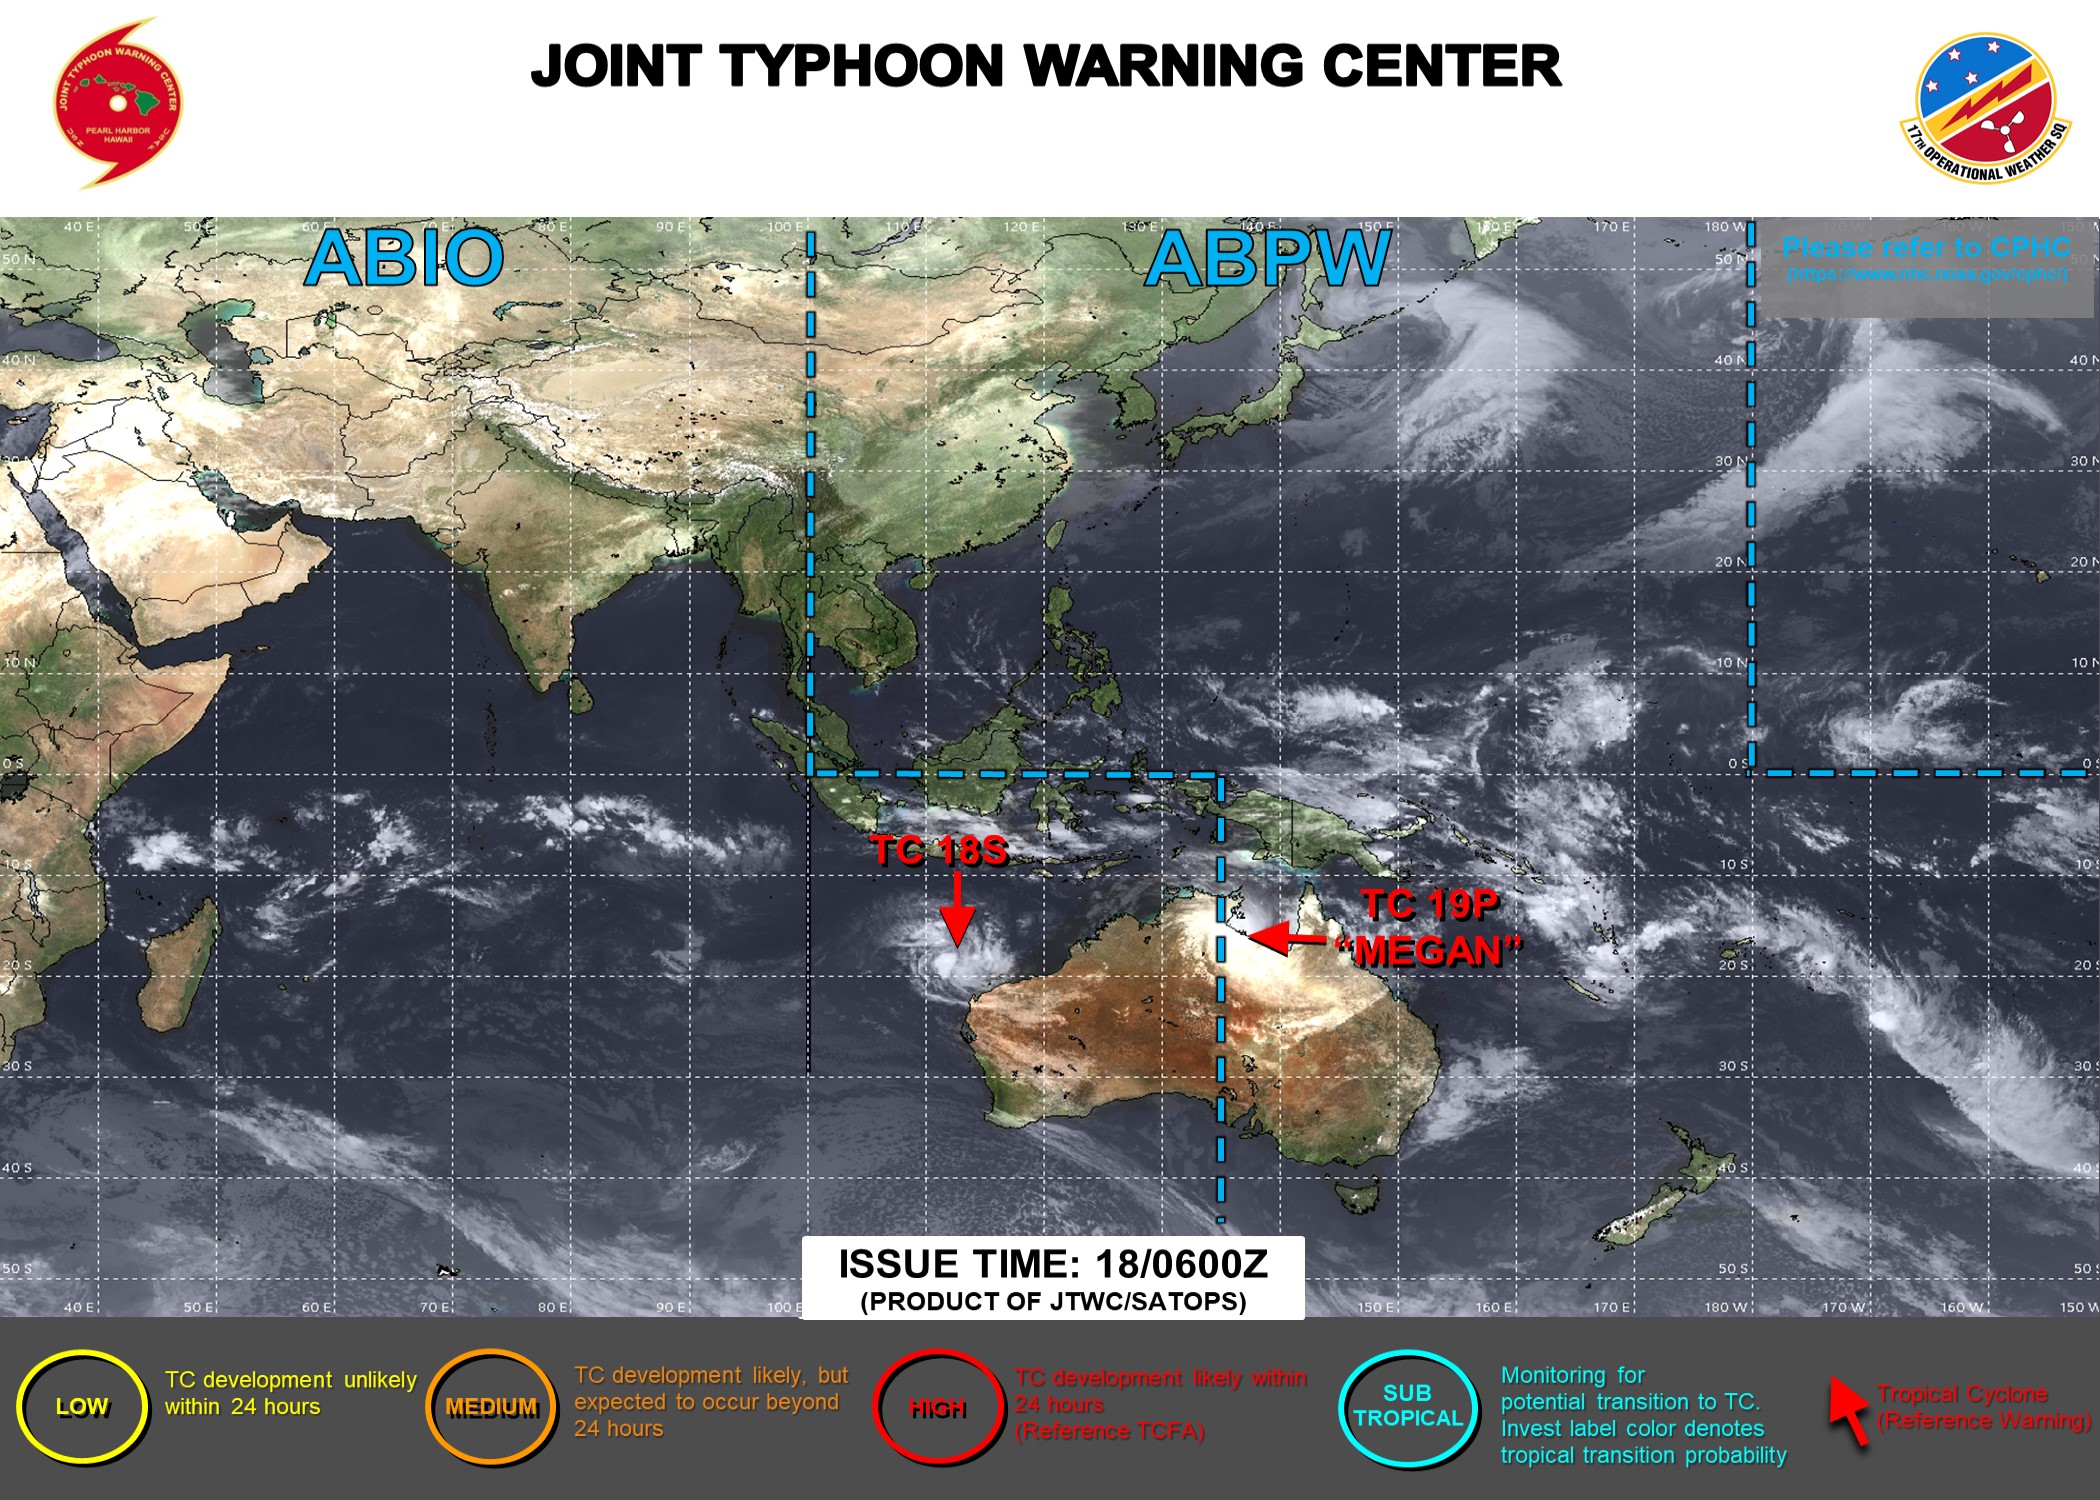 JTWC HAS ISSUED THE FINAL WARNING ON TC 19P AND ON TC 18S. JTWC IS STILL ISSUING 3HOURLY SATELLITE BULLETINS ON BOTH SYSTEMS.